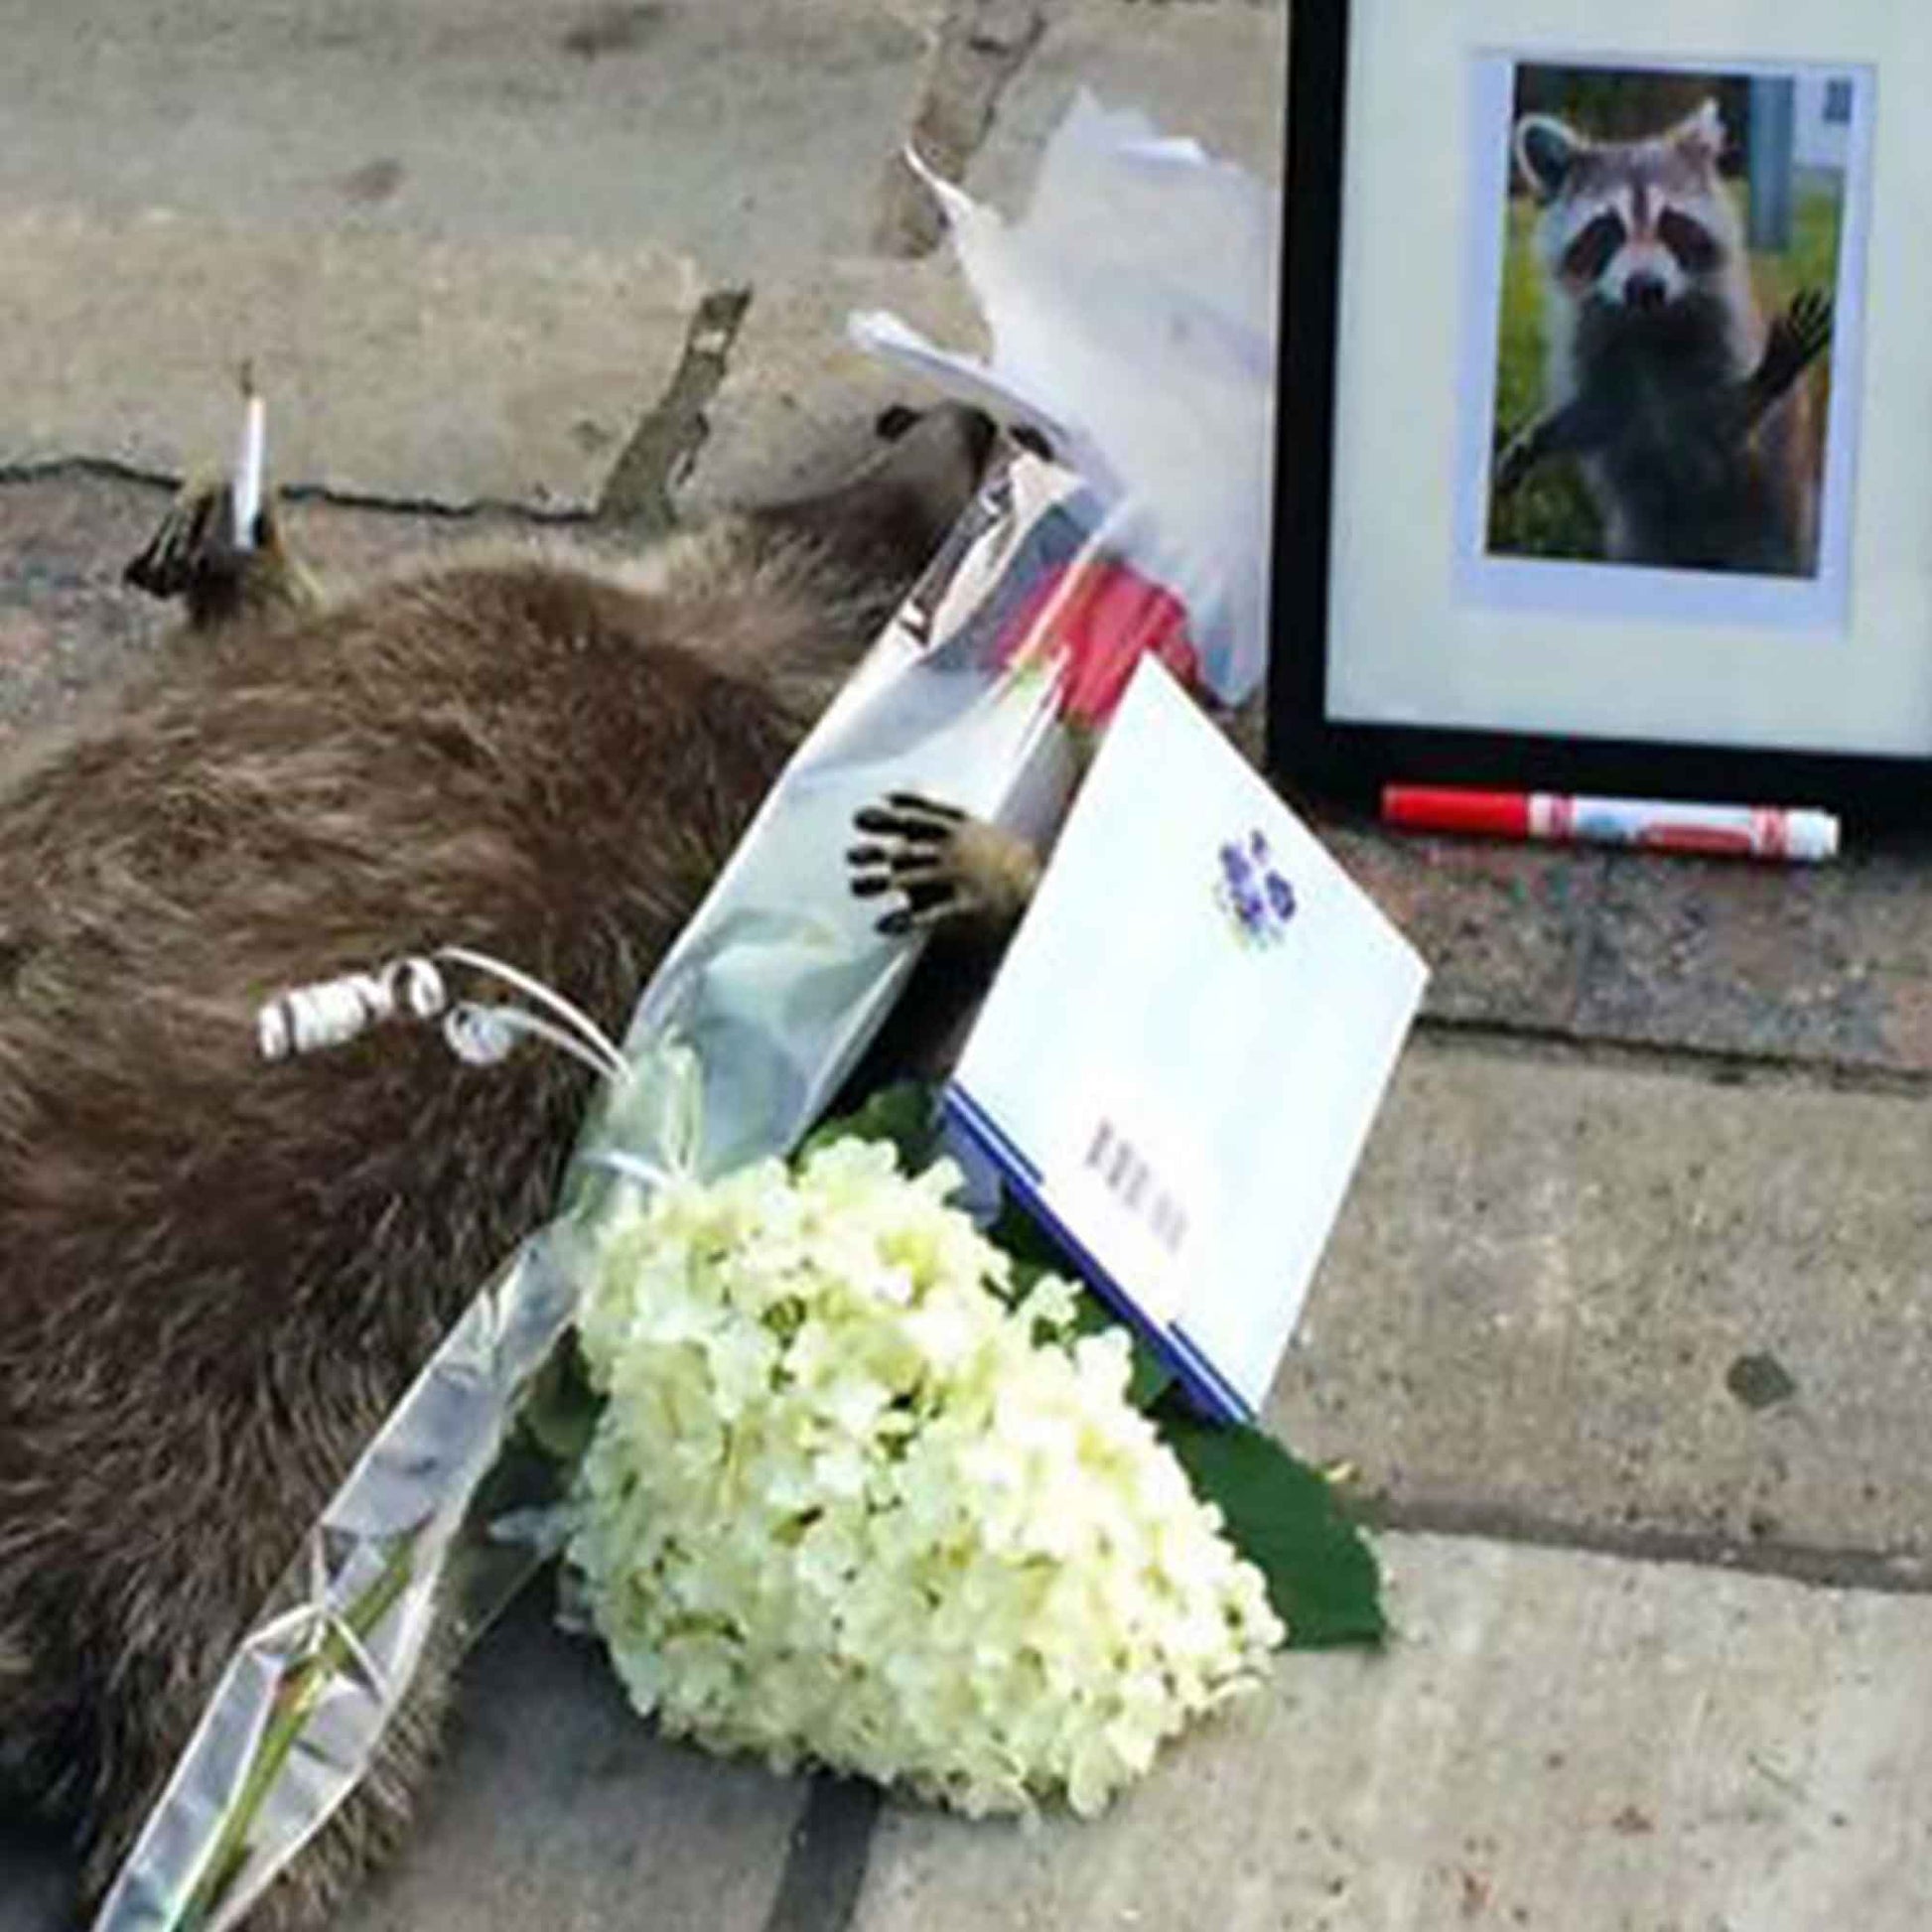 A photo of the raccoon roadkill that went viral in Toronto. The body of the raccoon is laying lifeless with memorial items around it, a rose, flowers, card, and a framed photo of a raccoon.